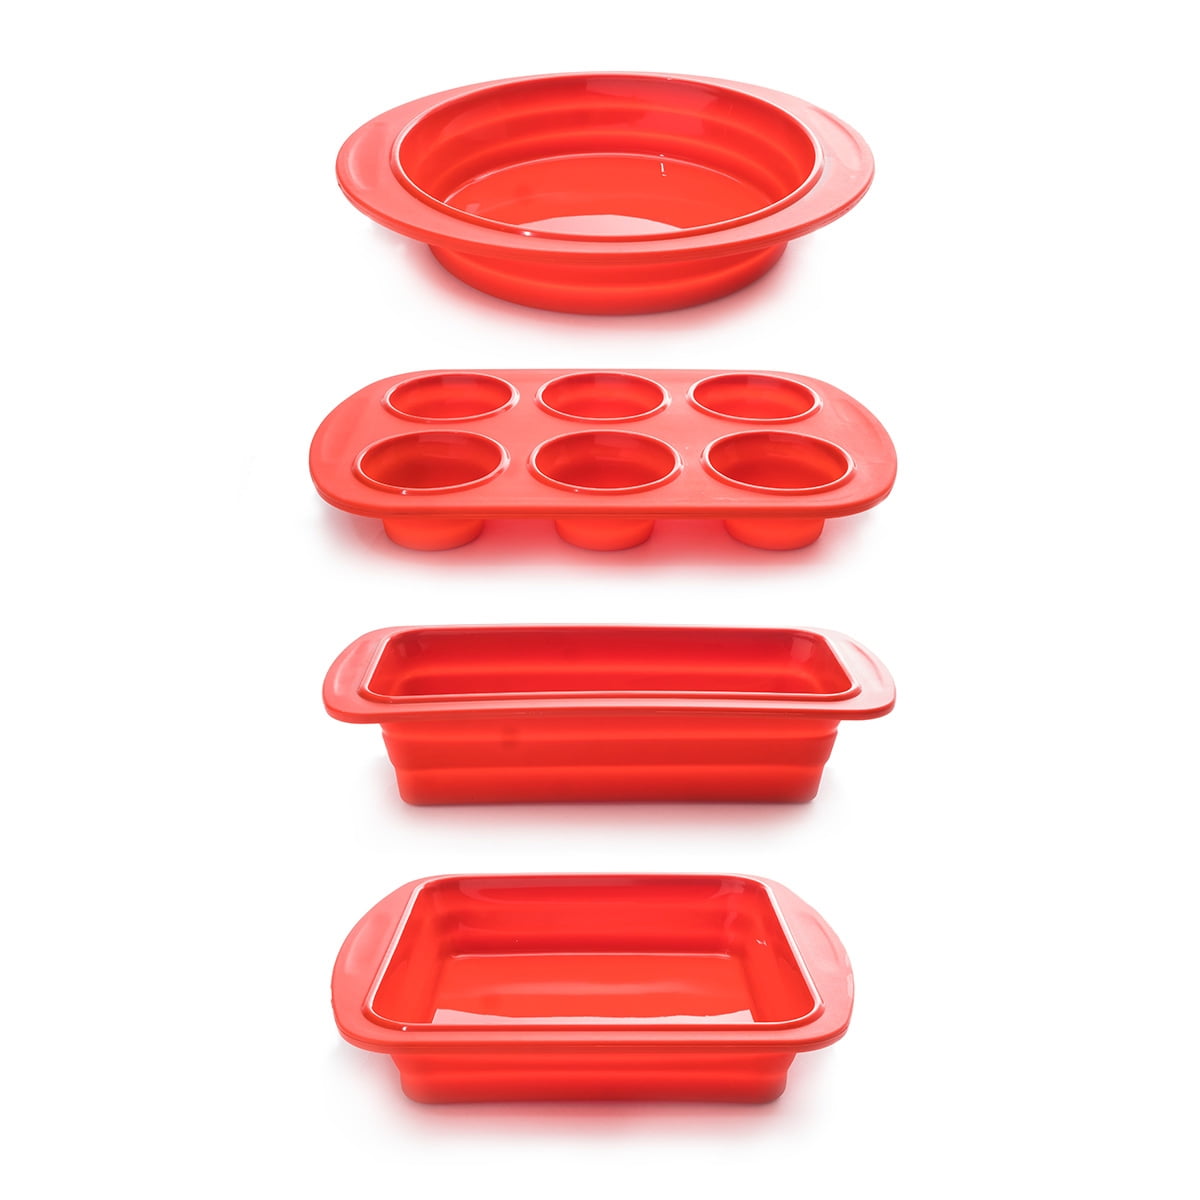 Cook's Companion® 4-Piece Collapsible Silicone Bakeware Set